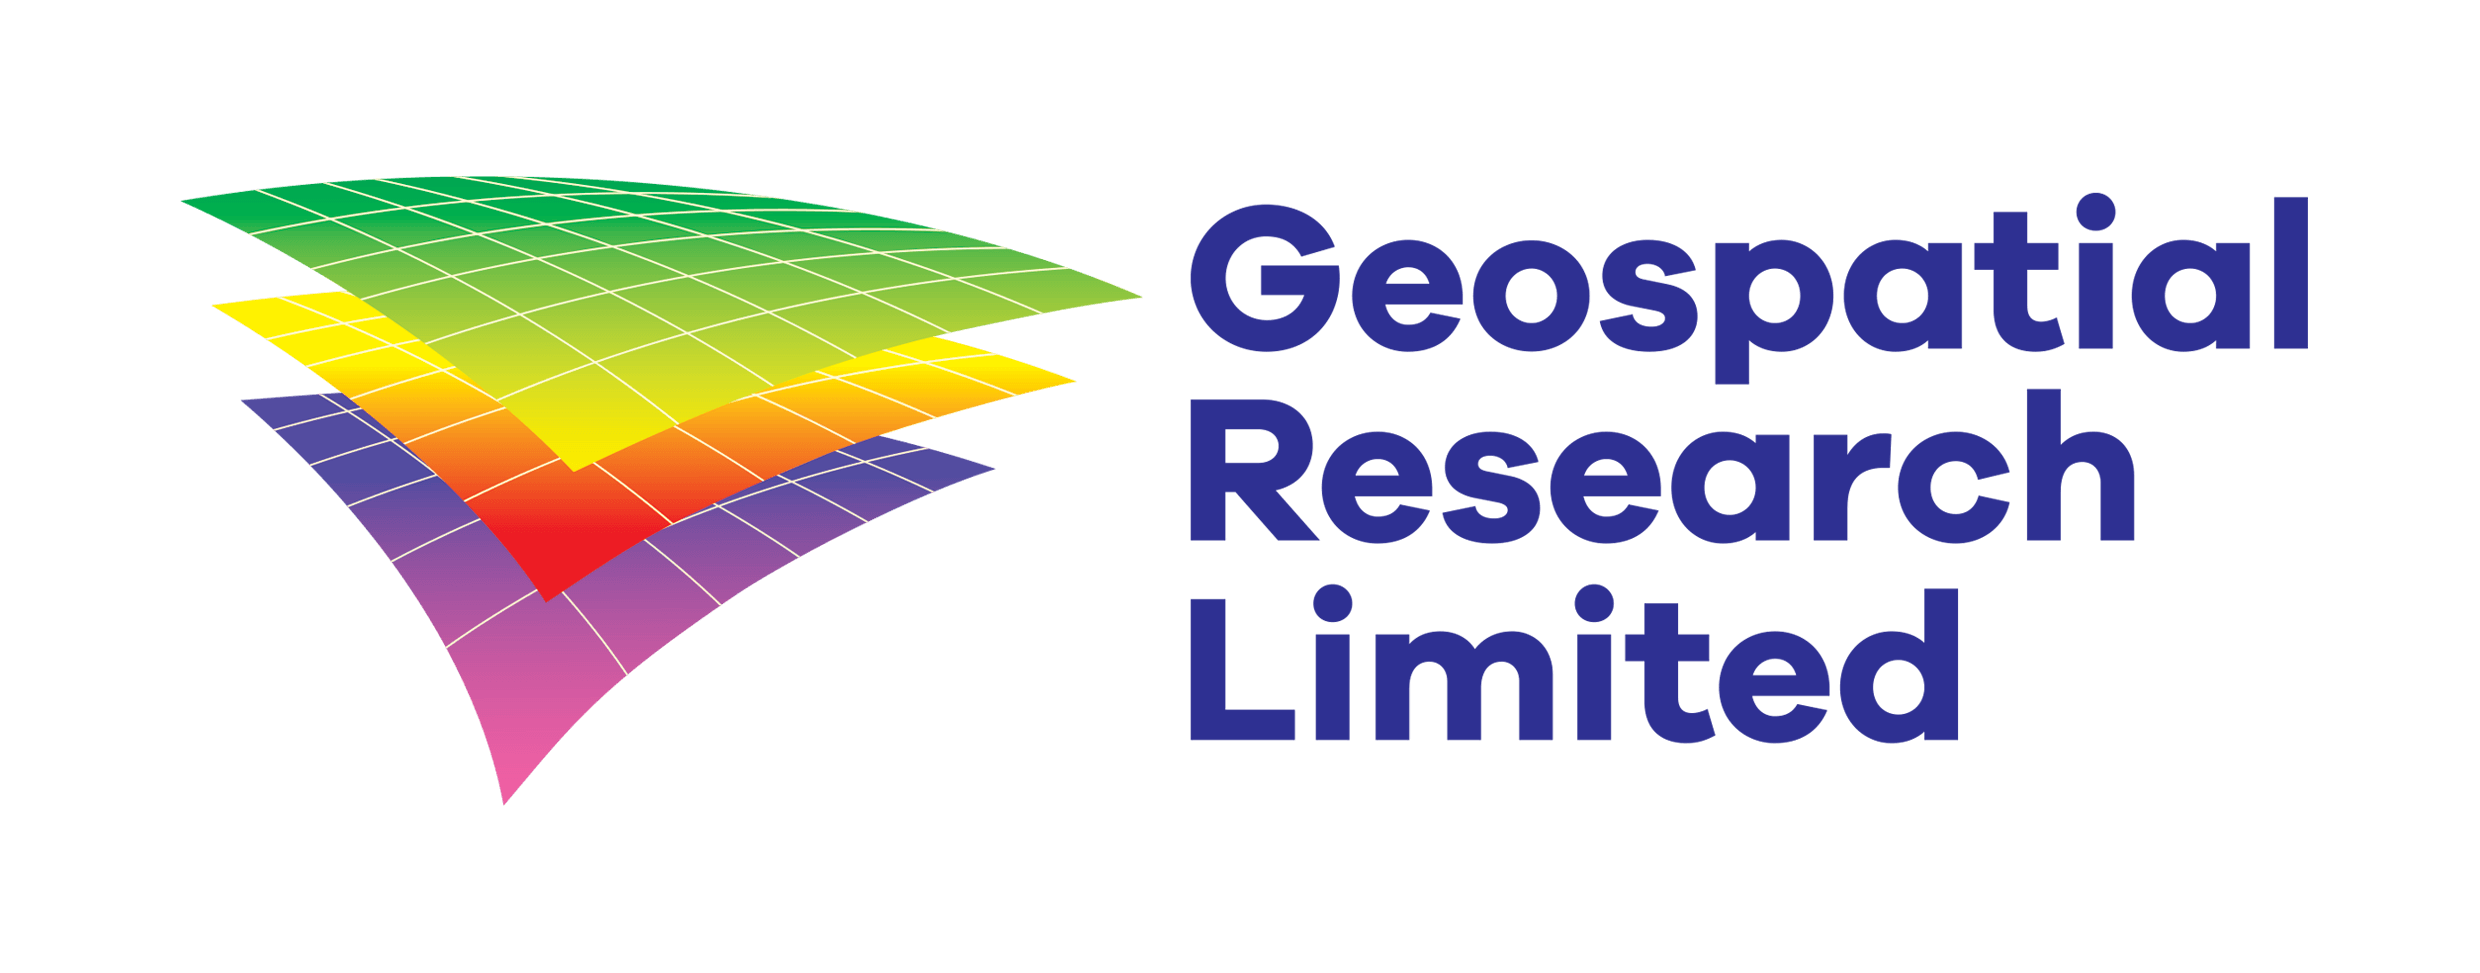 Geospatial Research Limited Master Logo